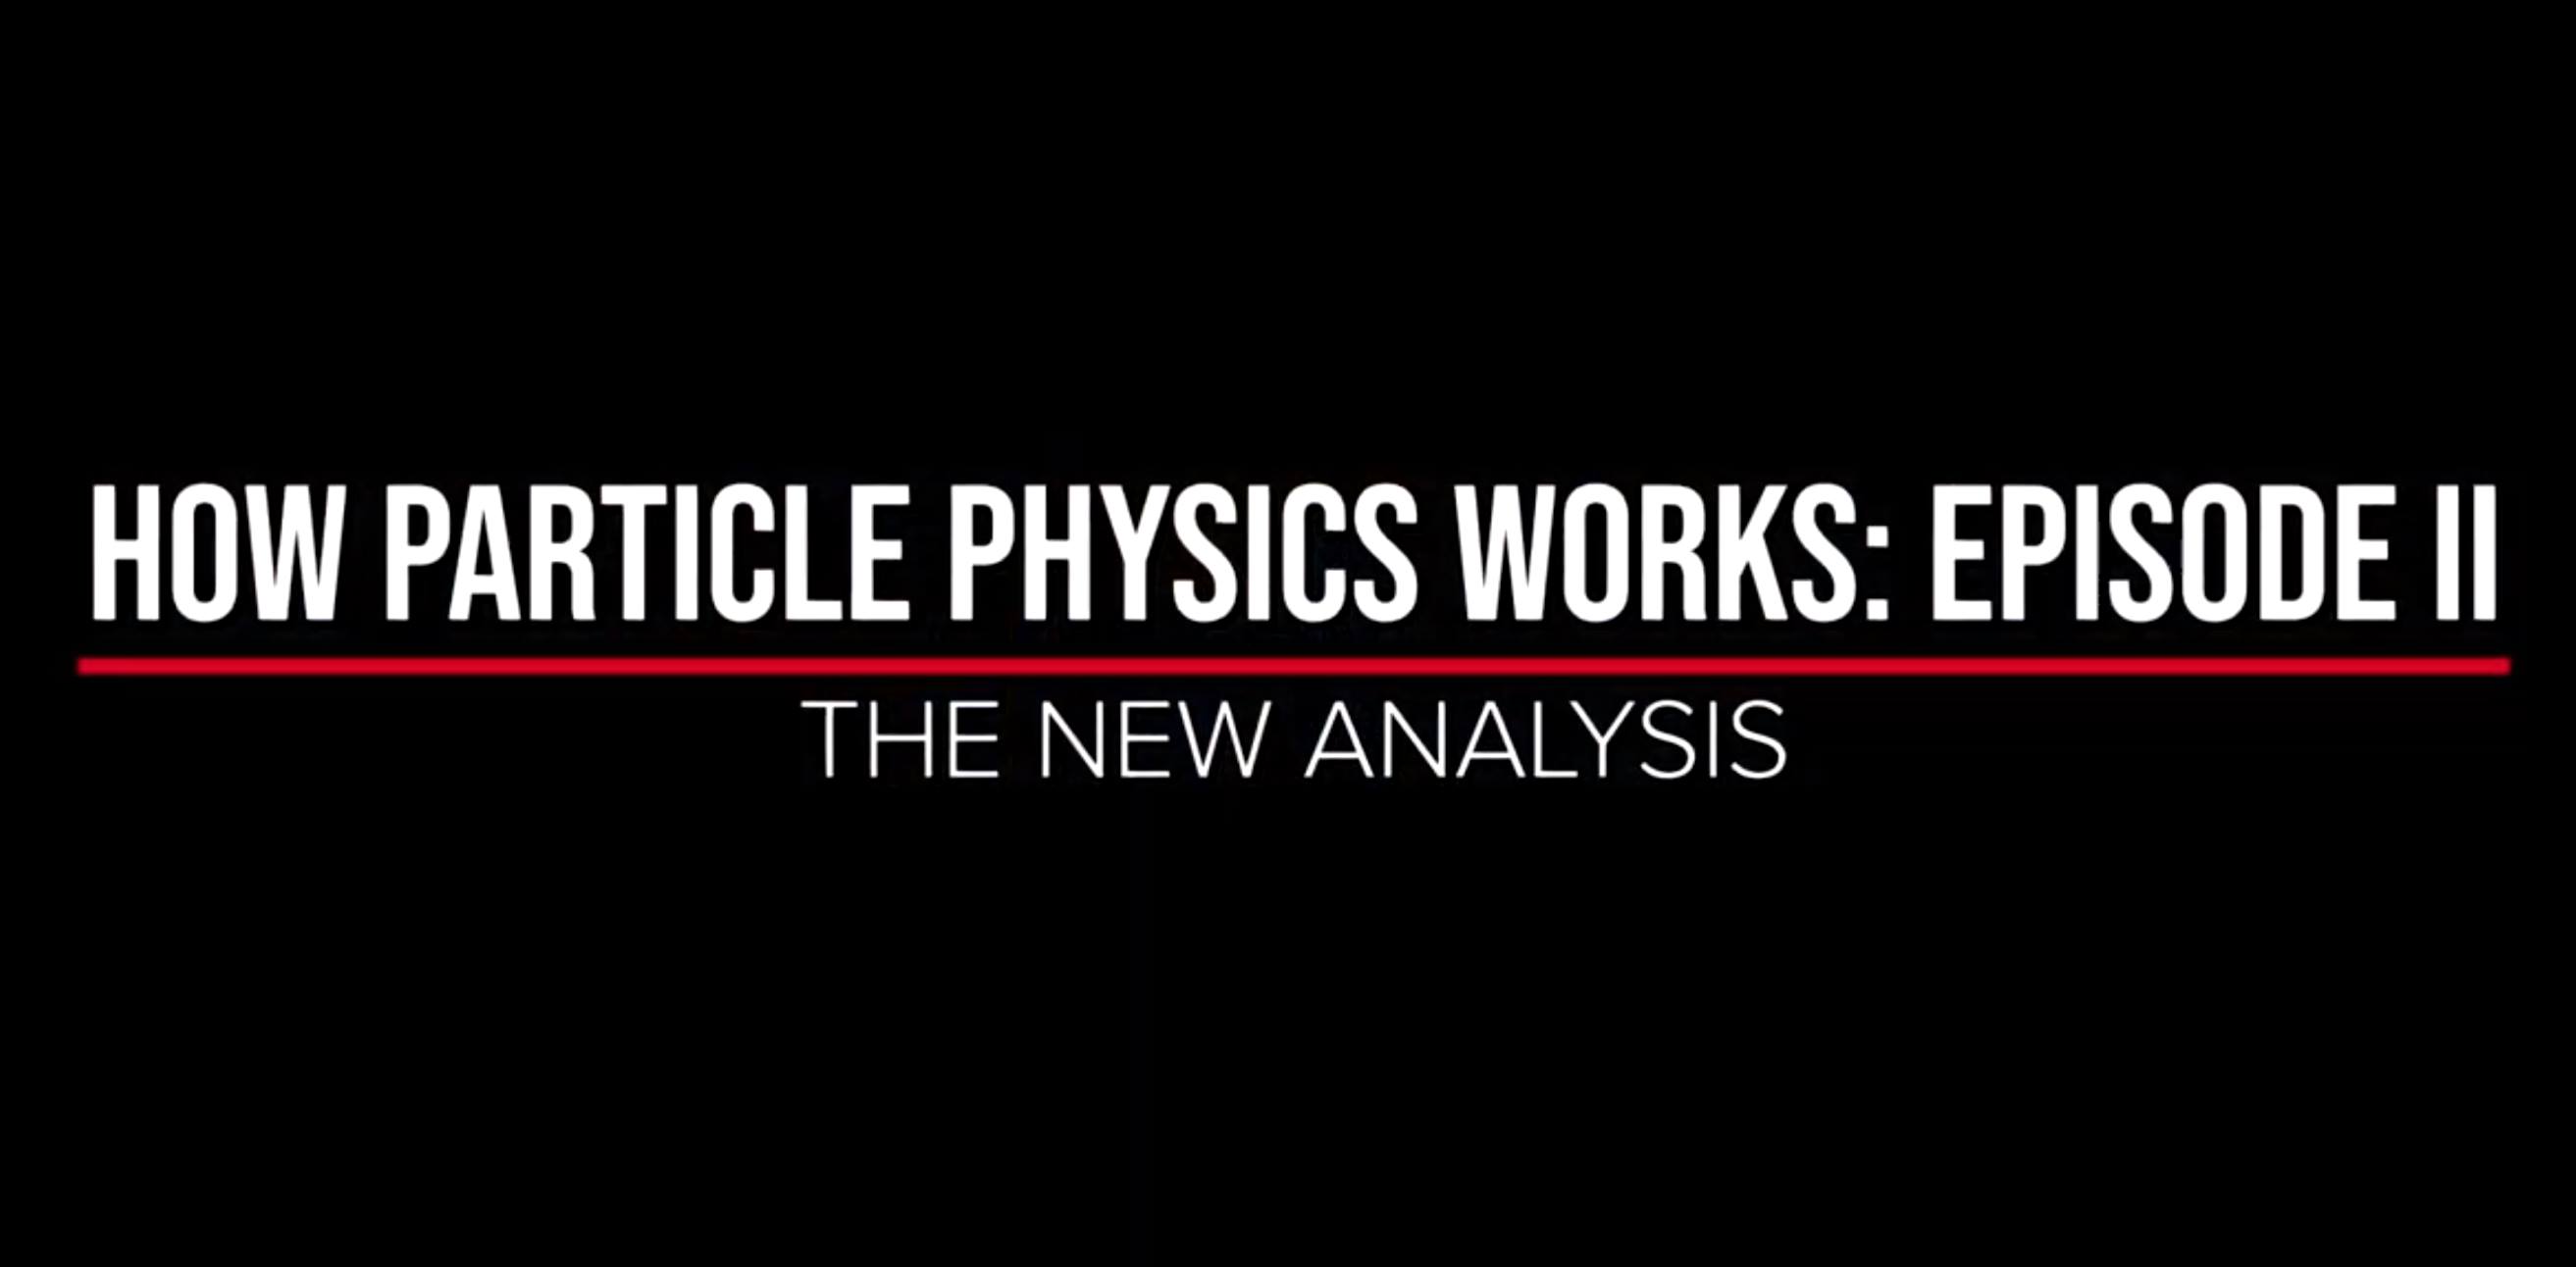 Hopes and worries on B-physics anomalies